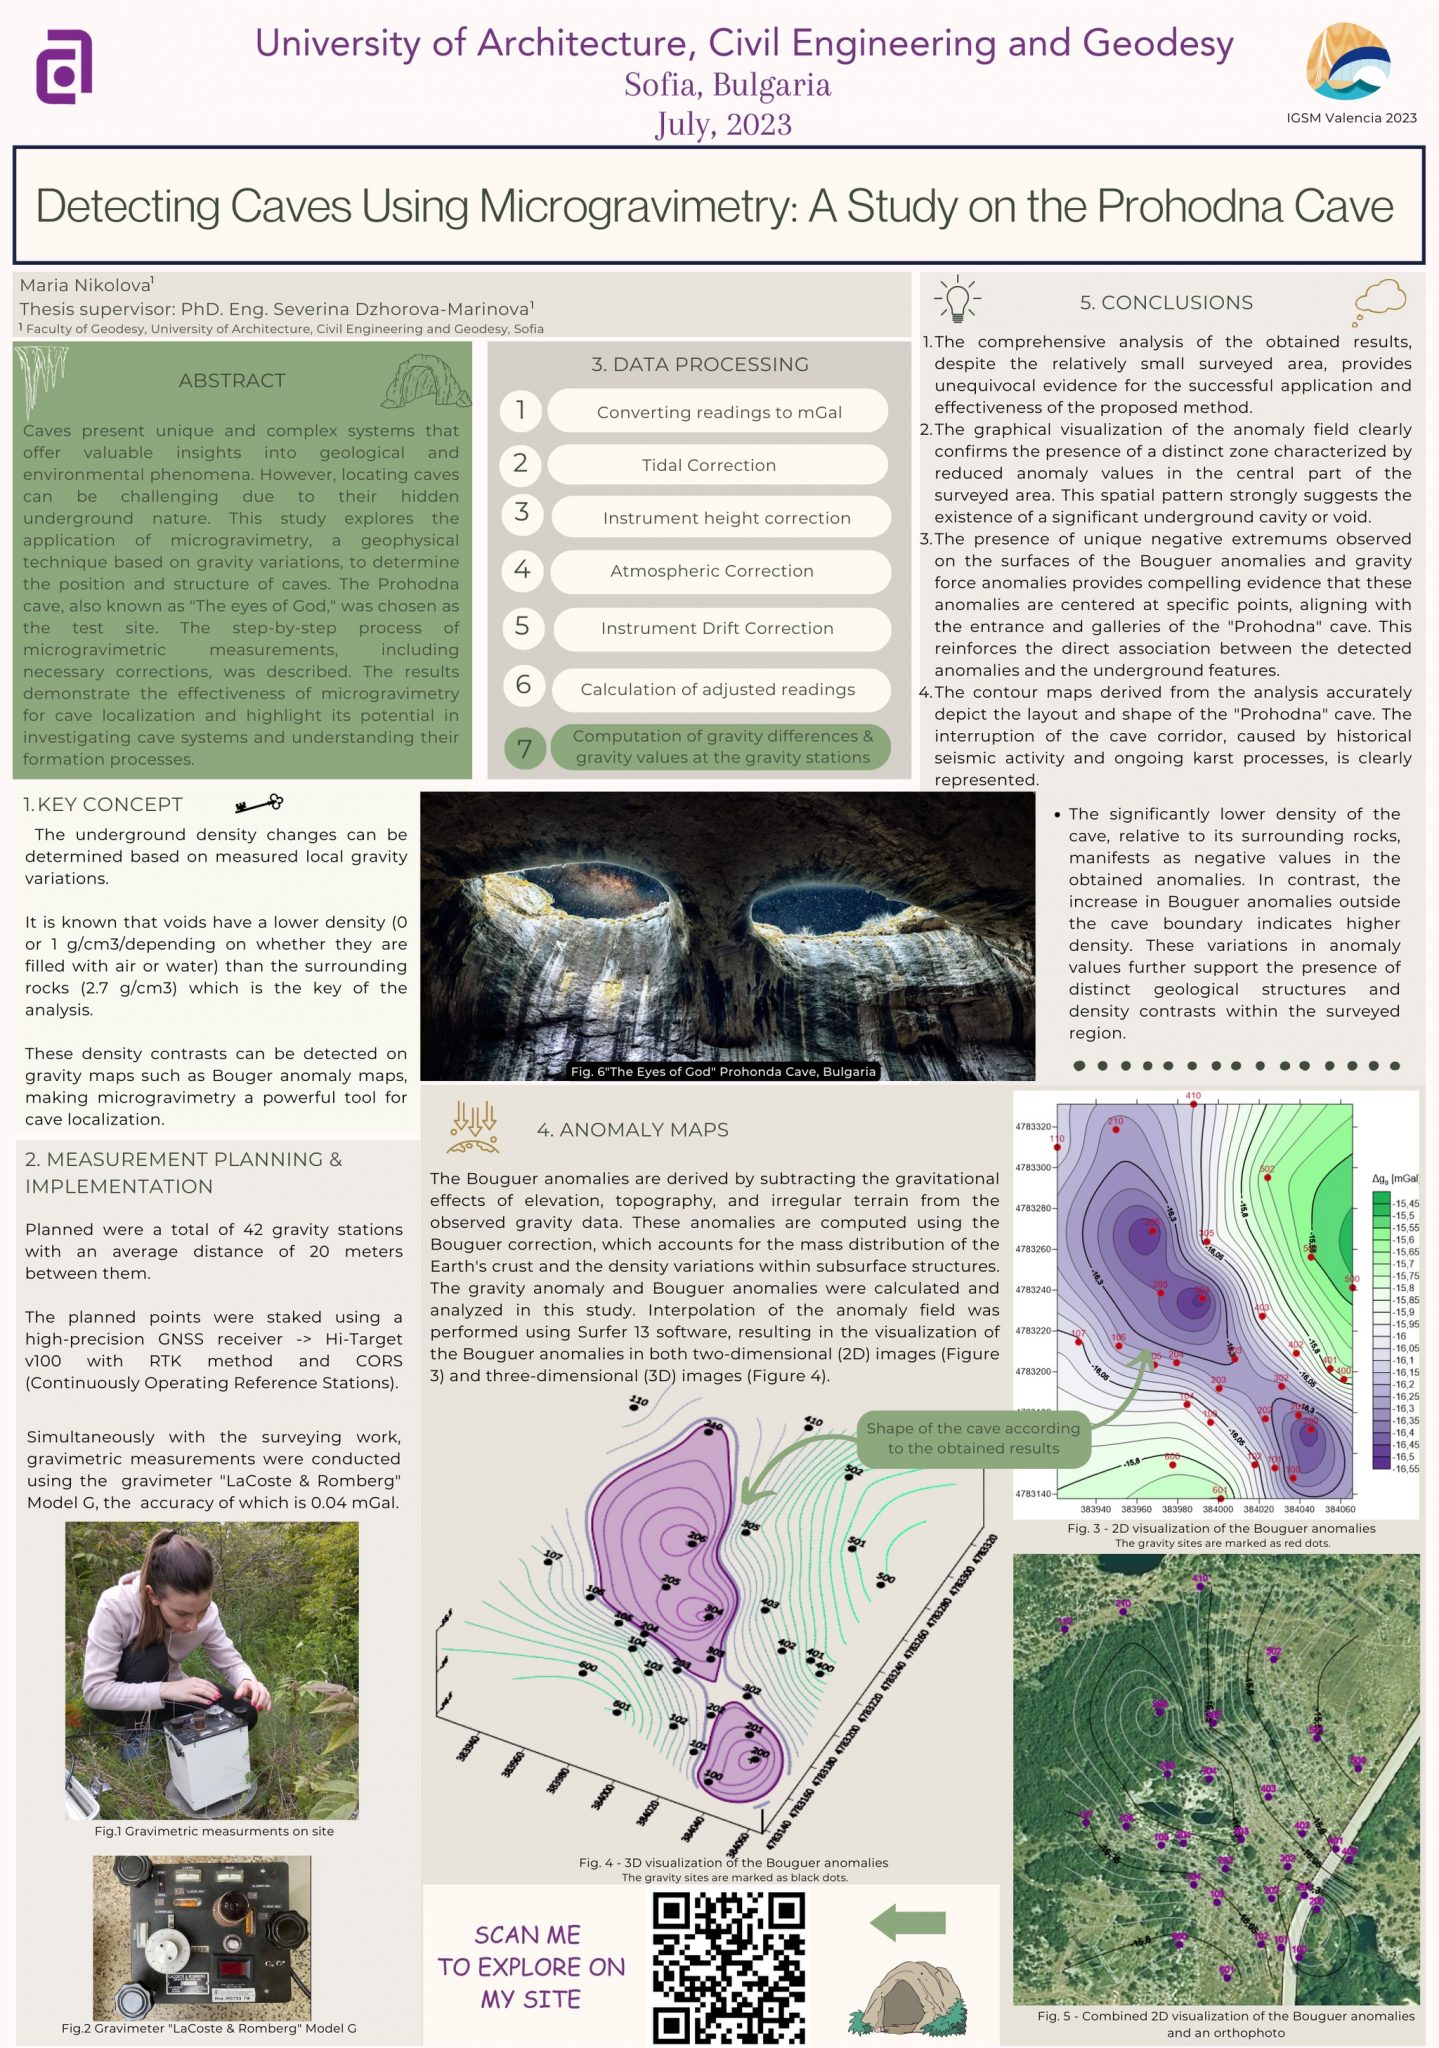 Detecting caves using Microgravimetry: a study on Prohodna cave by Maria Nikolova